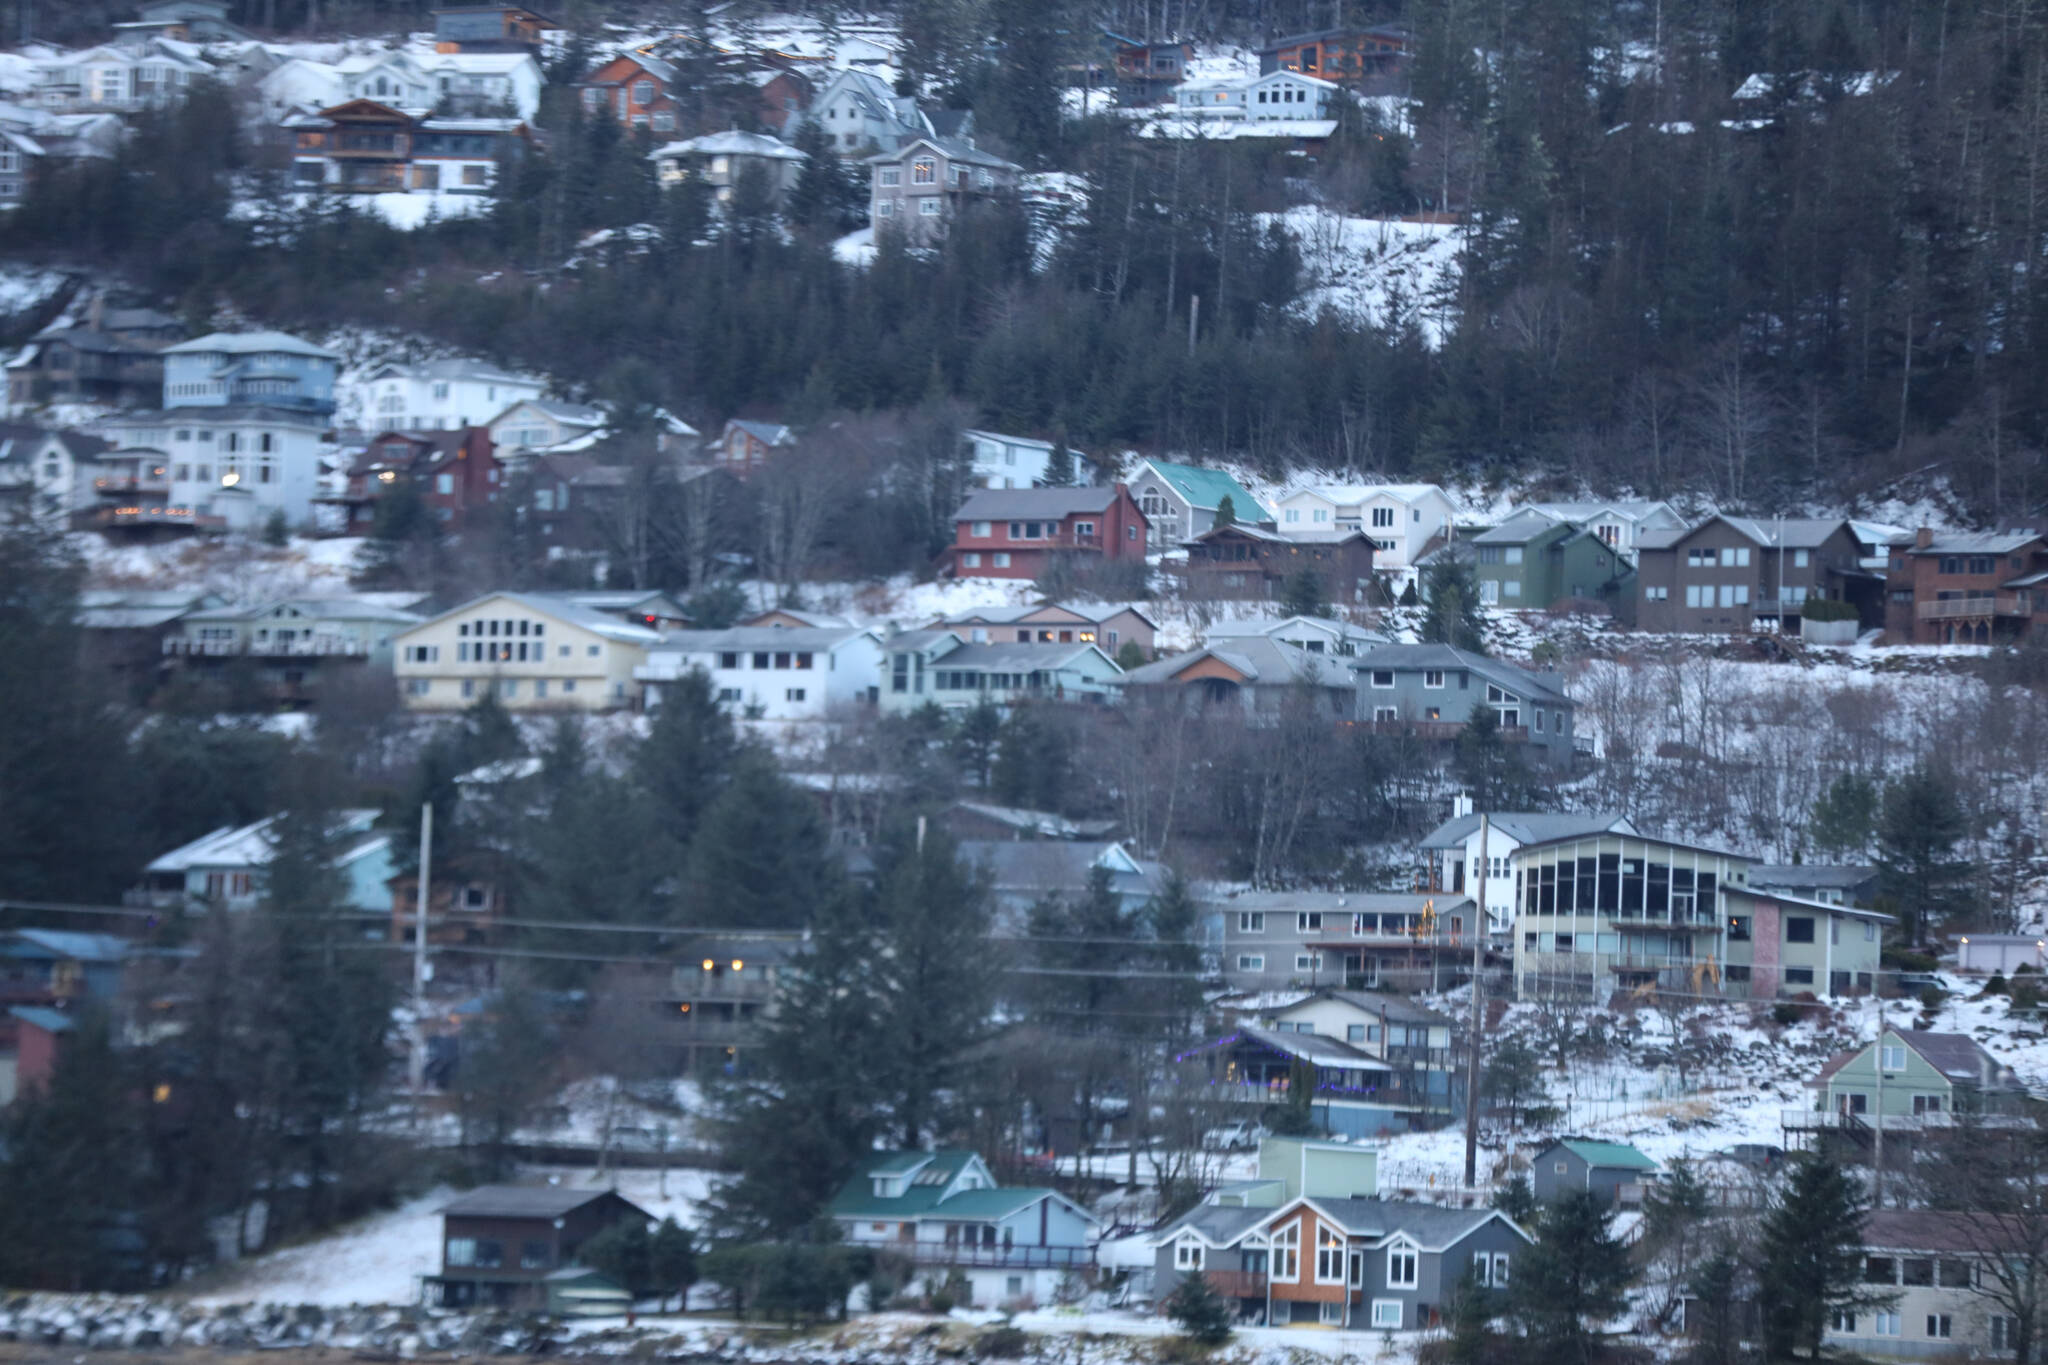 Snows is scattered on the ground between houses on Douglas. The city recently sent out property value notices to Juneau owners, informing them of the annual assessed values of their property. (Clarise Larson / Juneau Empire File)